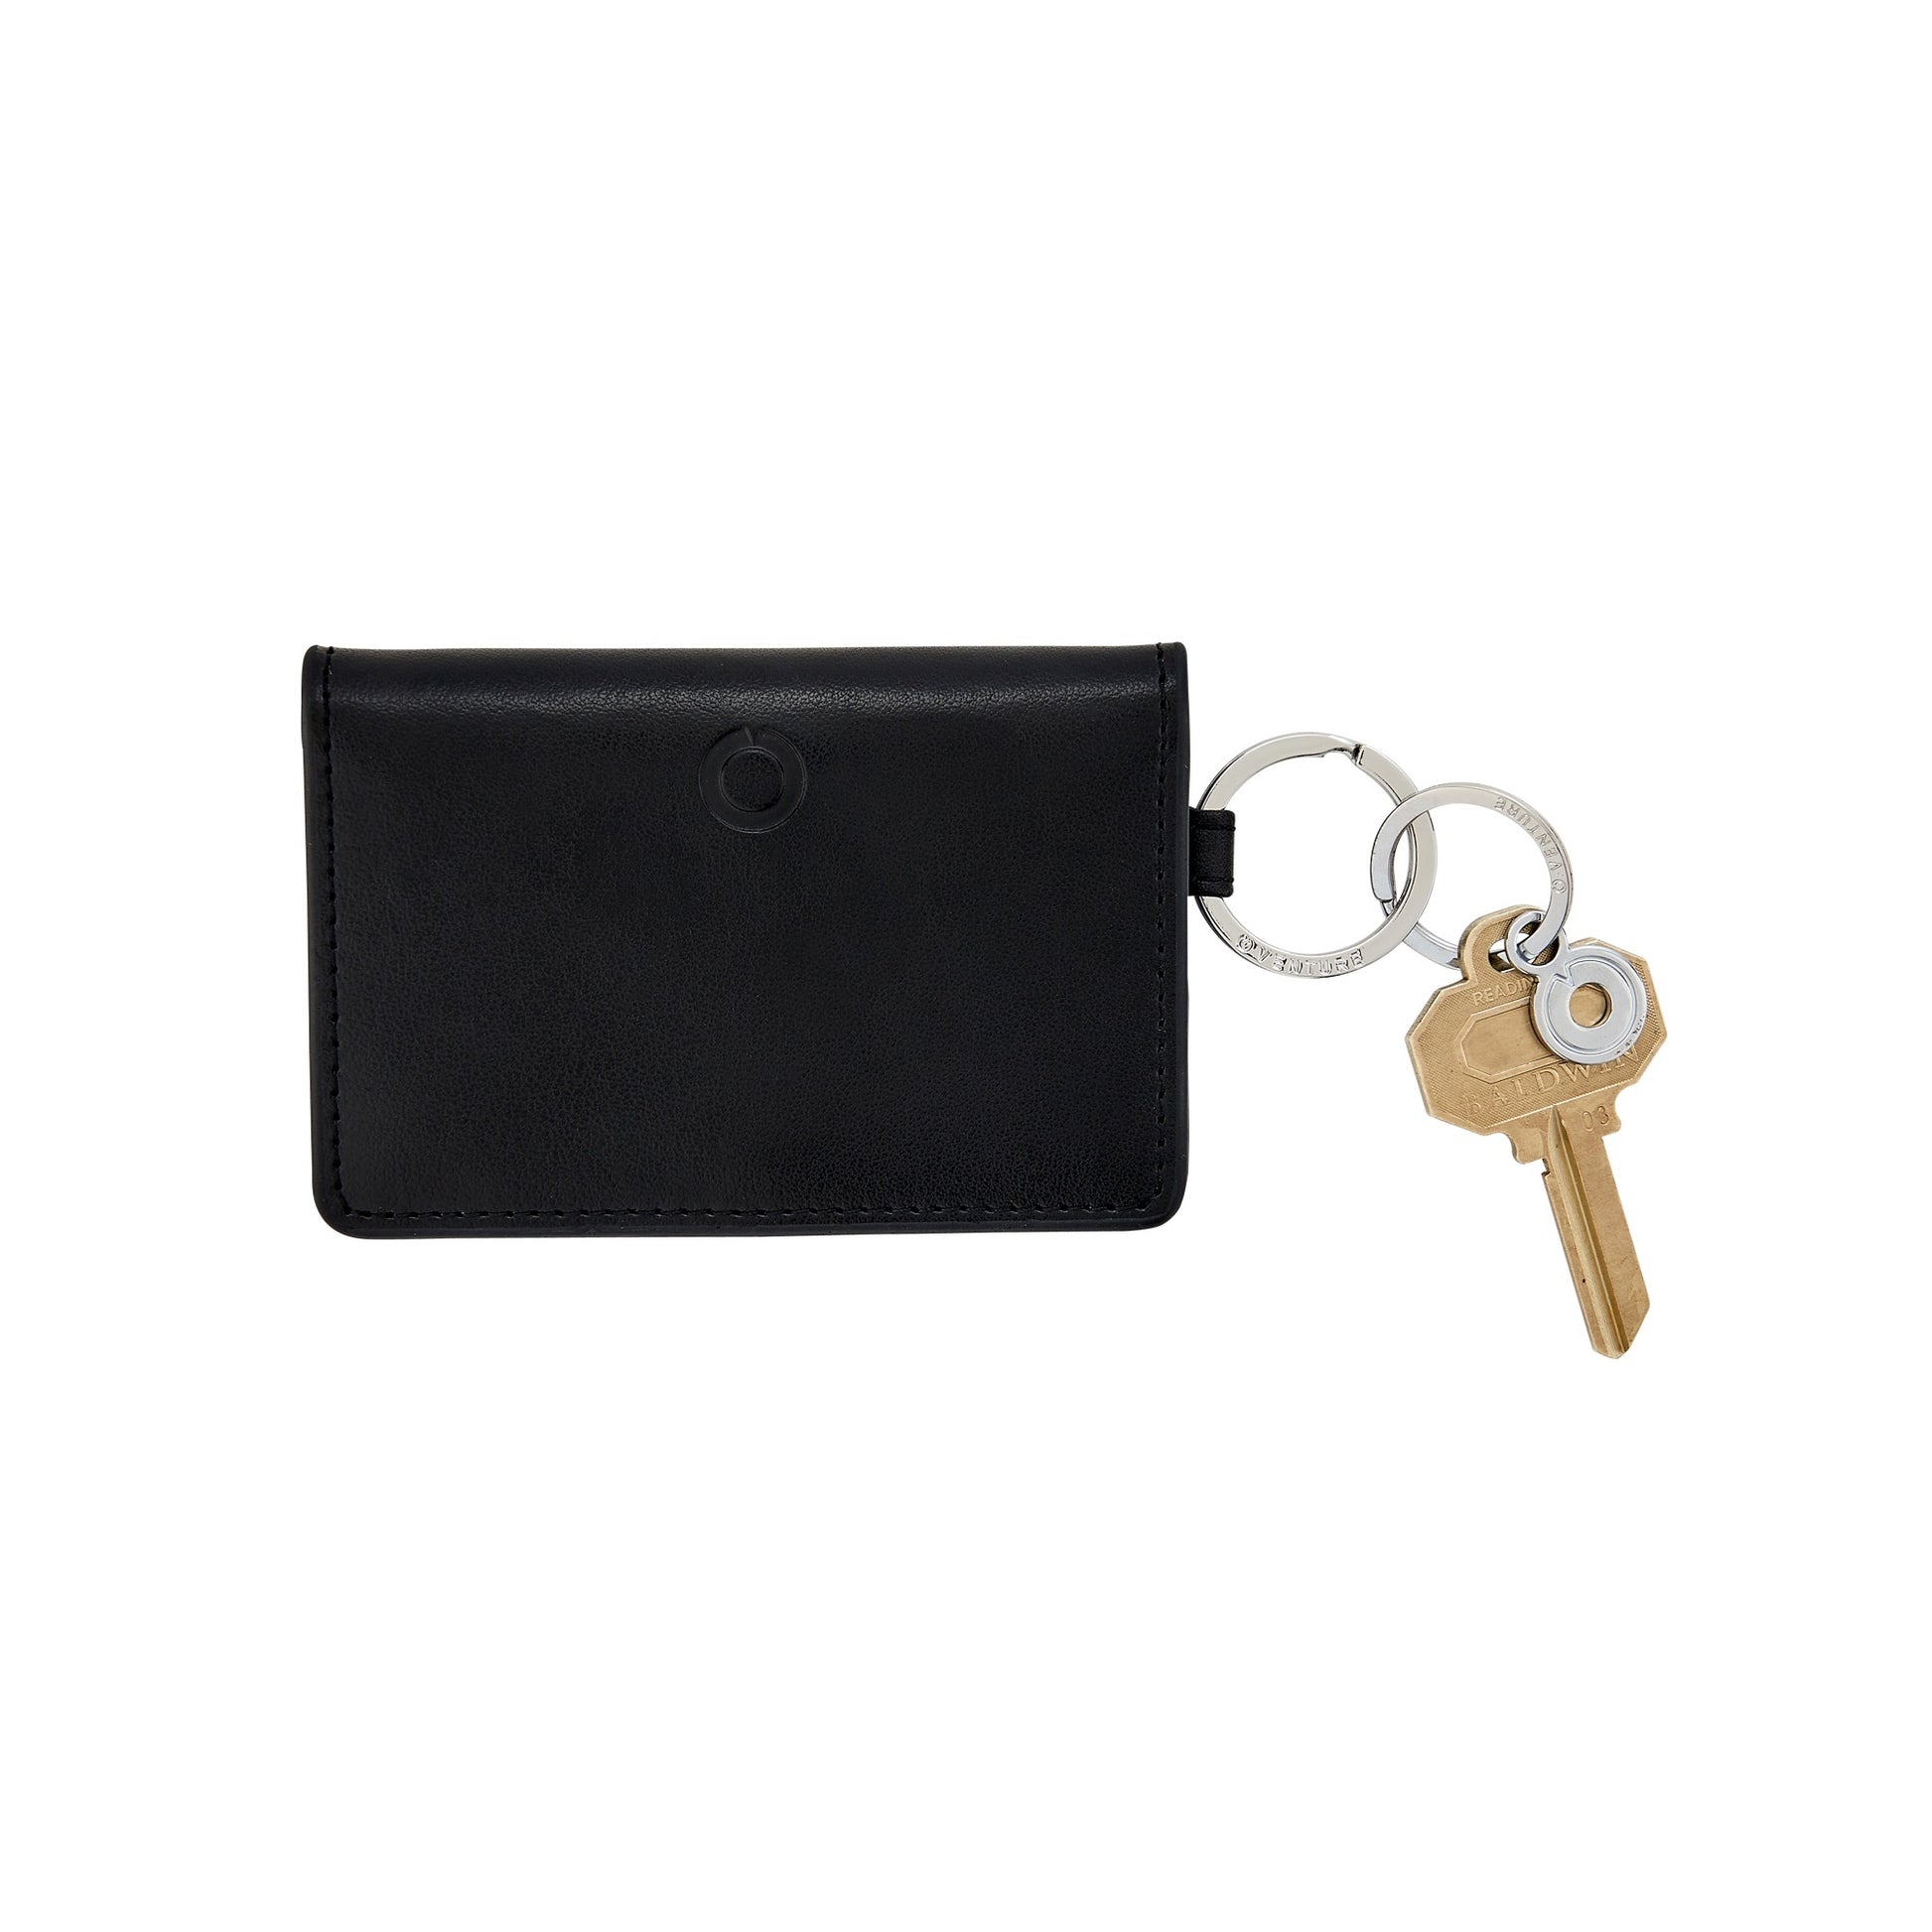 Leather ID case in black leather which can stand alone as a key ring.